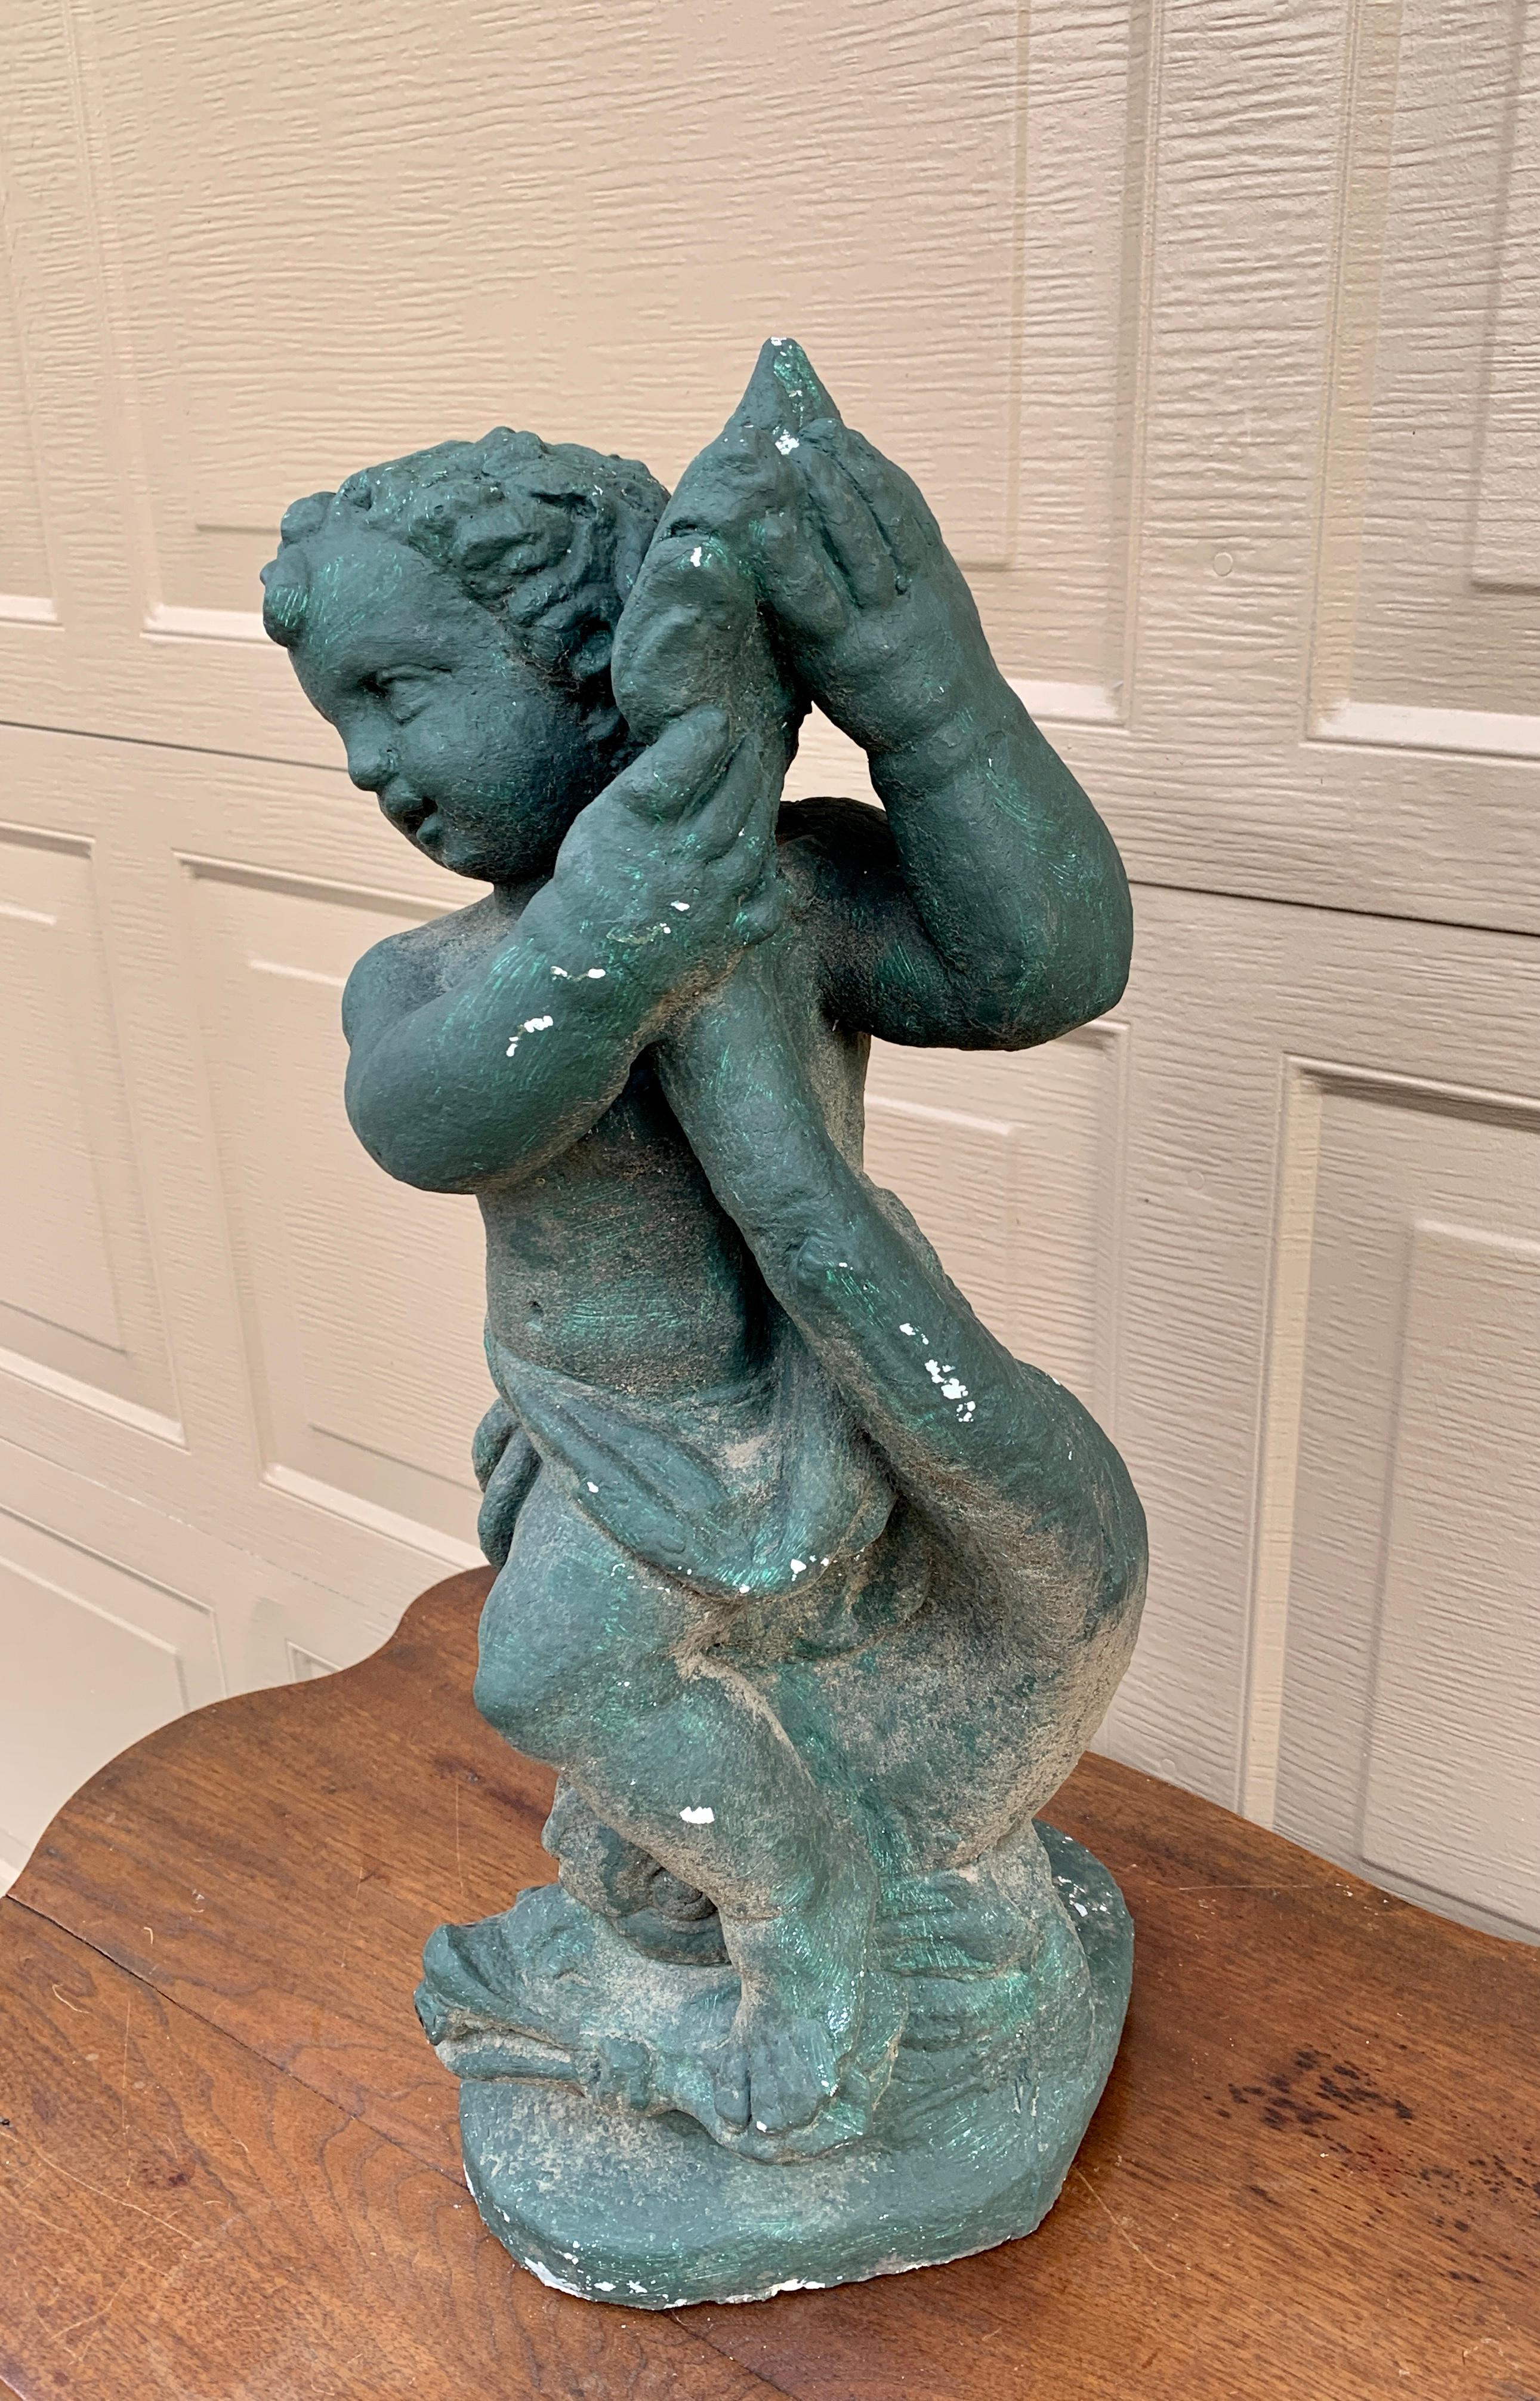 A stunning cast stone green statue of a cherub or putti holding a fish. The fish's mouth was once a fountain and could still be used that way if desired. The piece is the perfect accent in a garden. 

USA, Late 20th Century

Measures: 9